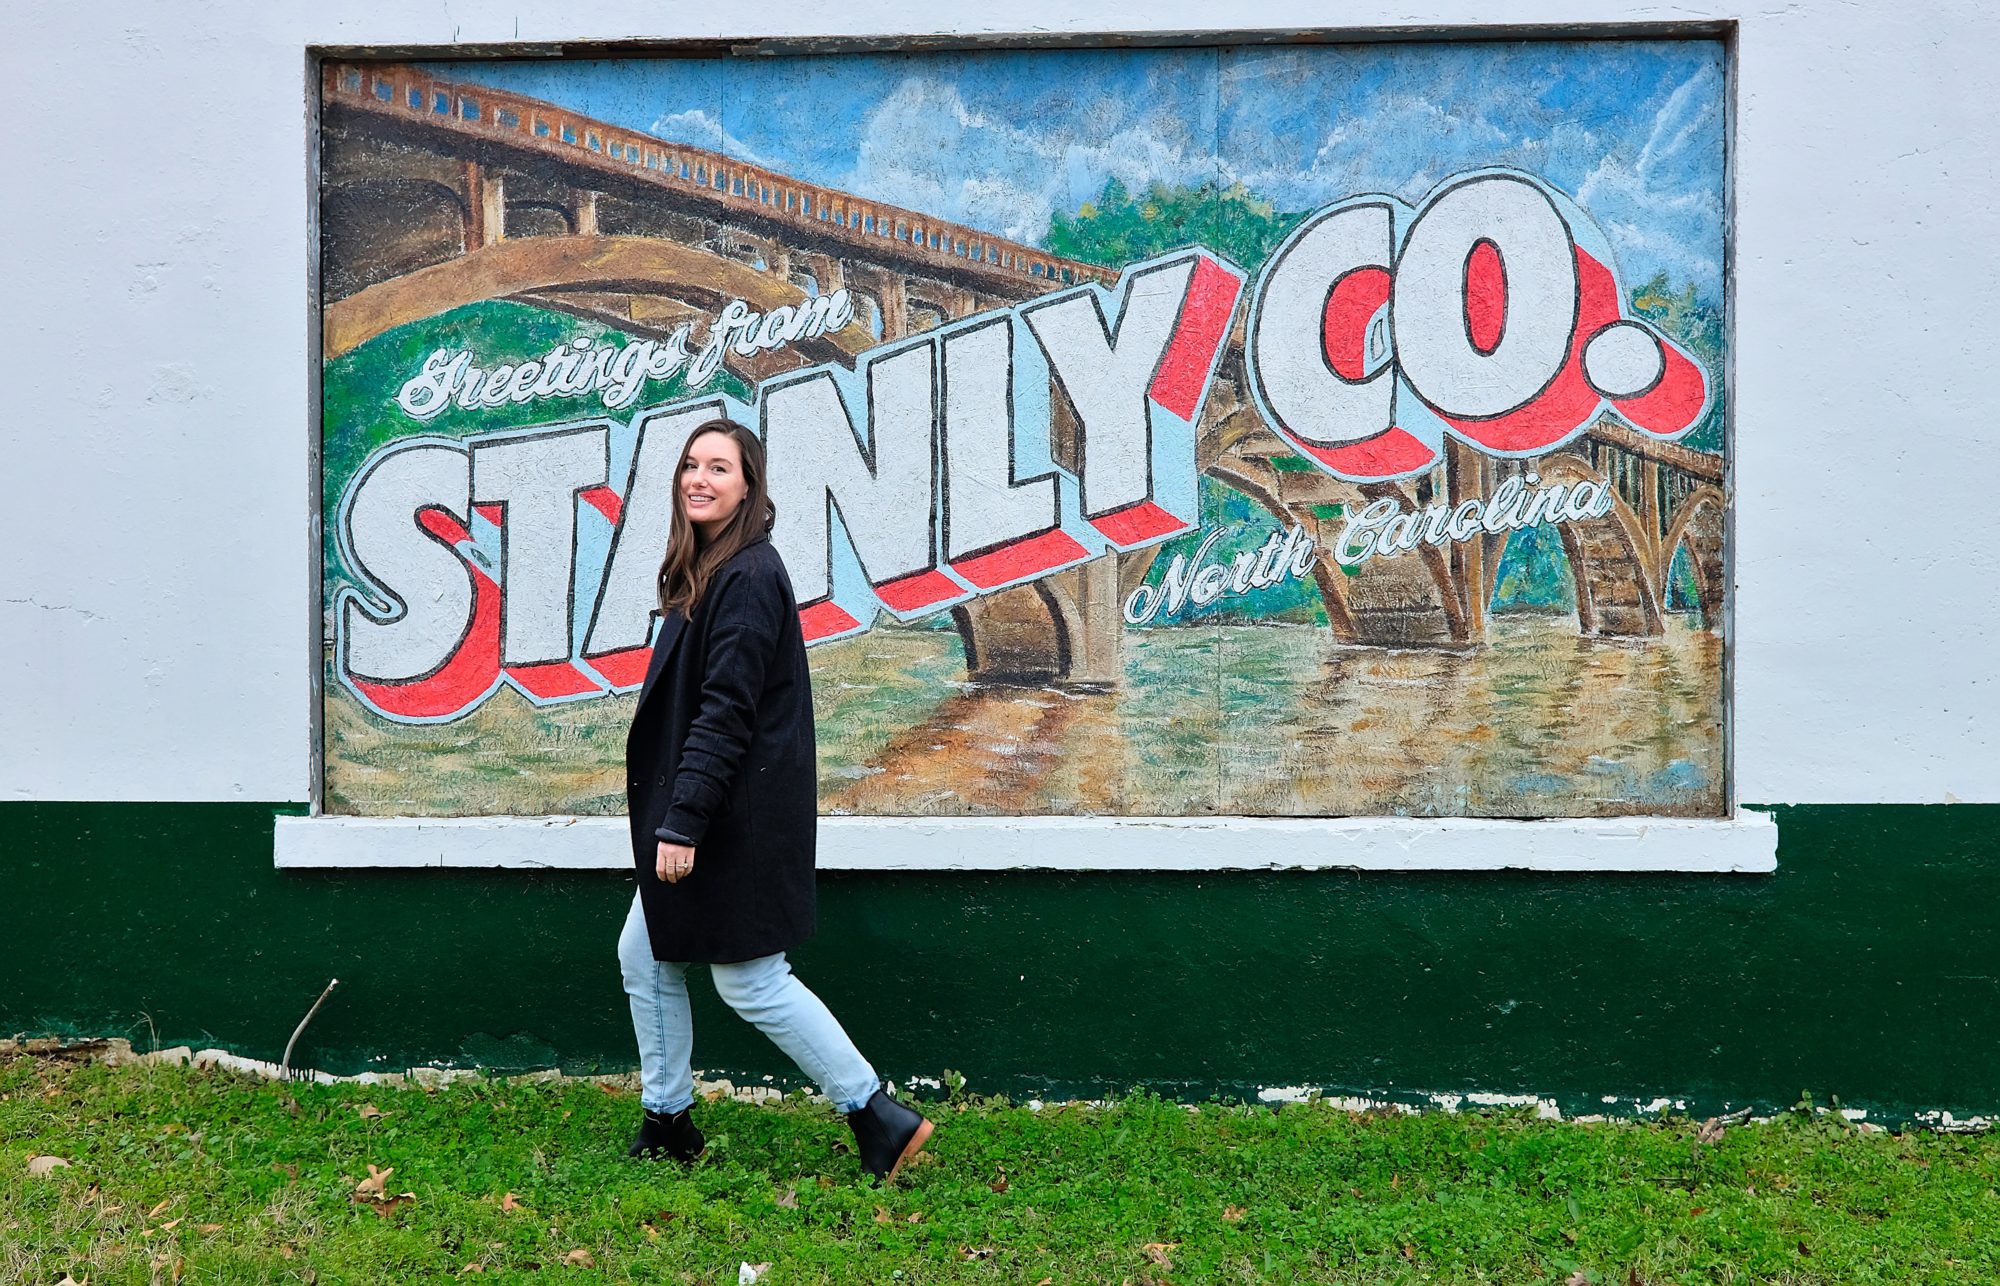 Alyssa walks in front of a mural that reads "Greetings from Stanly Co." in Albemarle